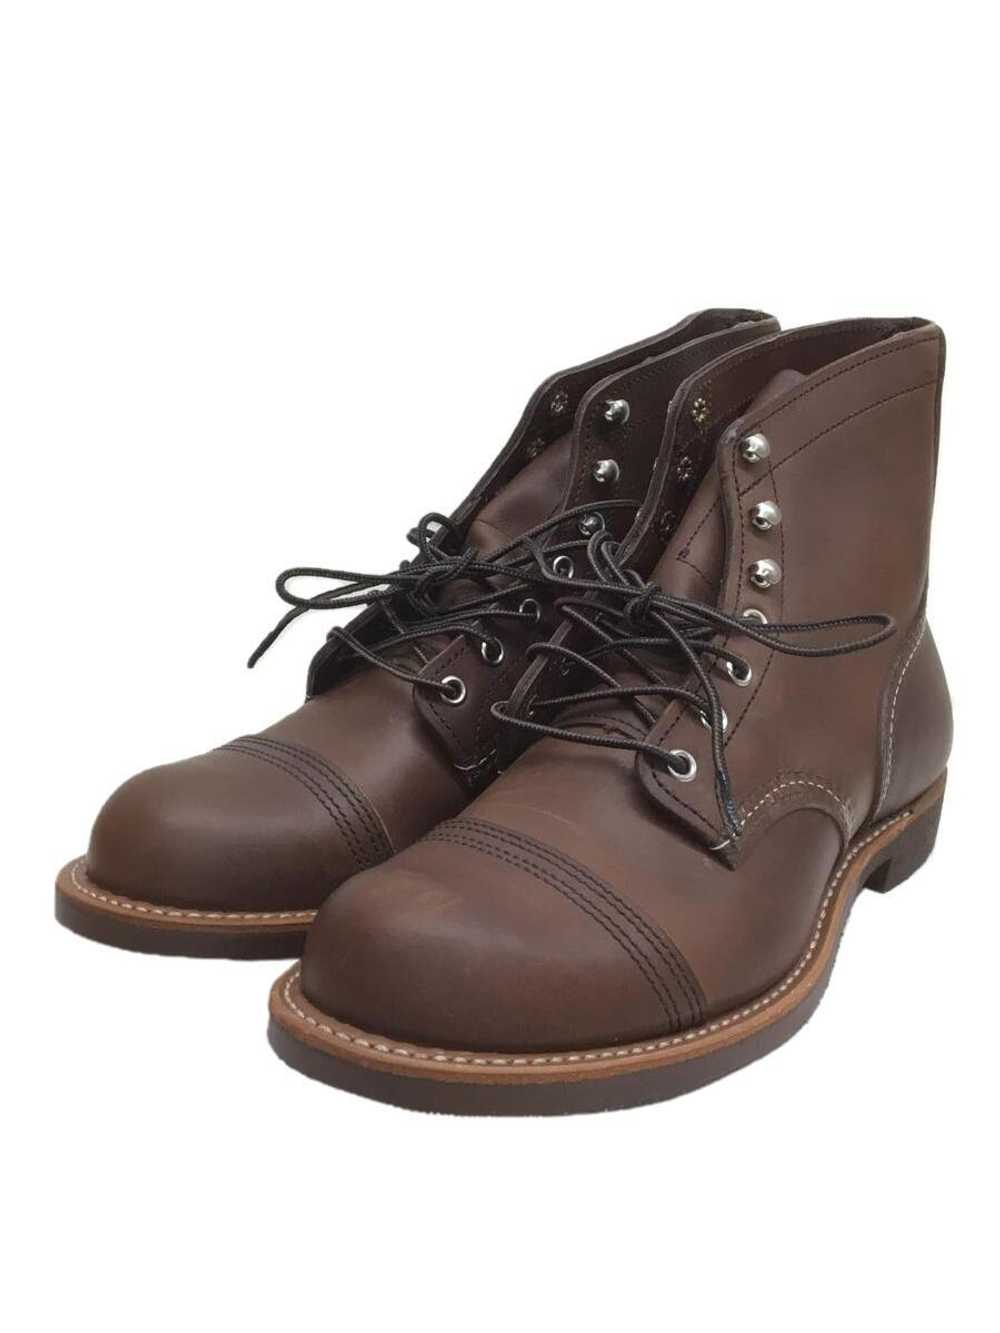 Red Wing Lace Up Boots/Iron Ranger/Us9.5/Widthd/B… - image 2